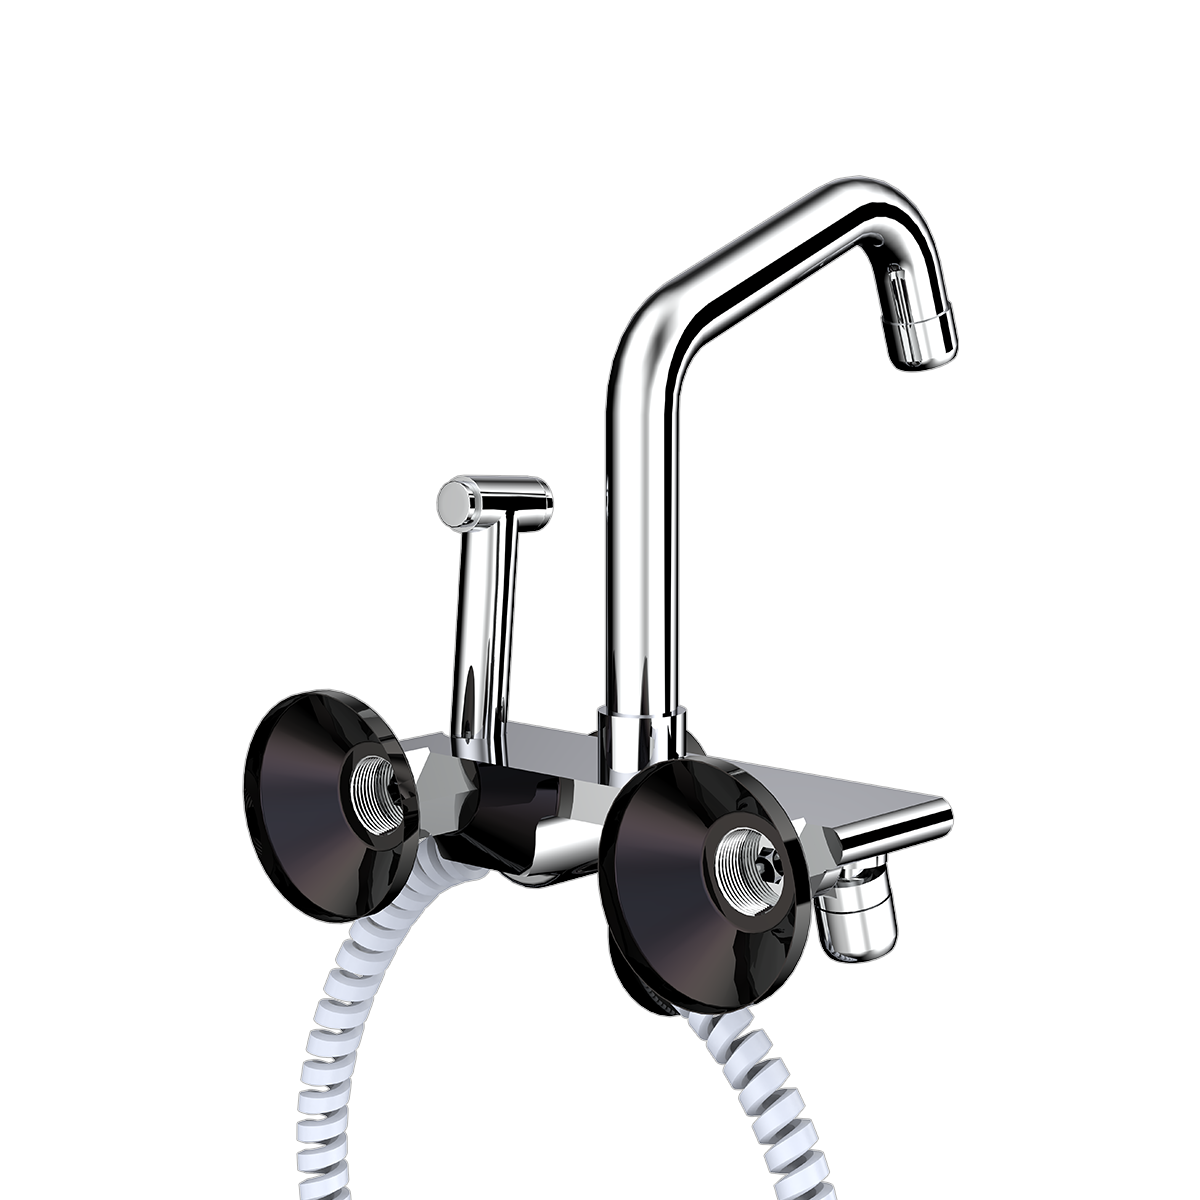 Wall Mounted Sink Mixer With Swivel Spout & Hand Shower